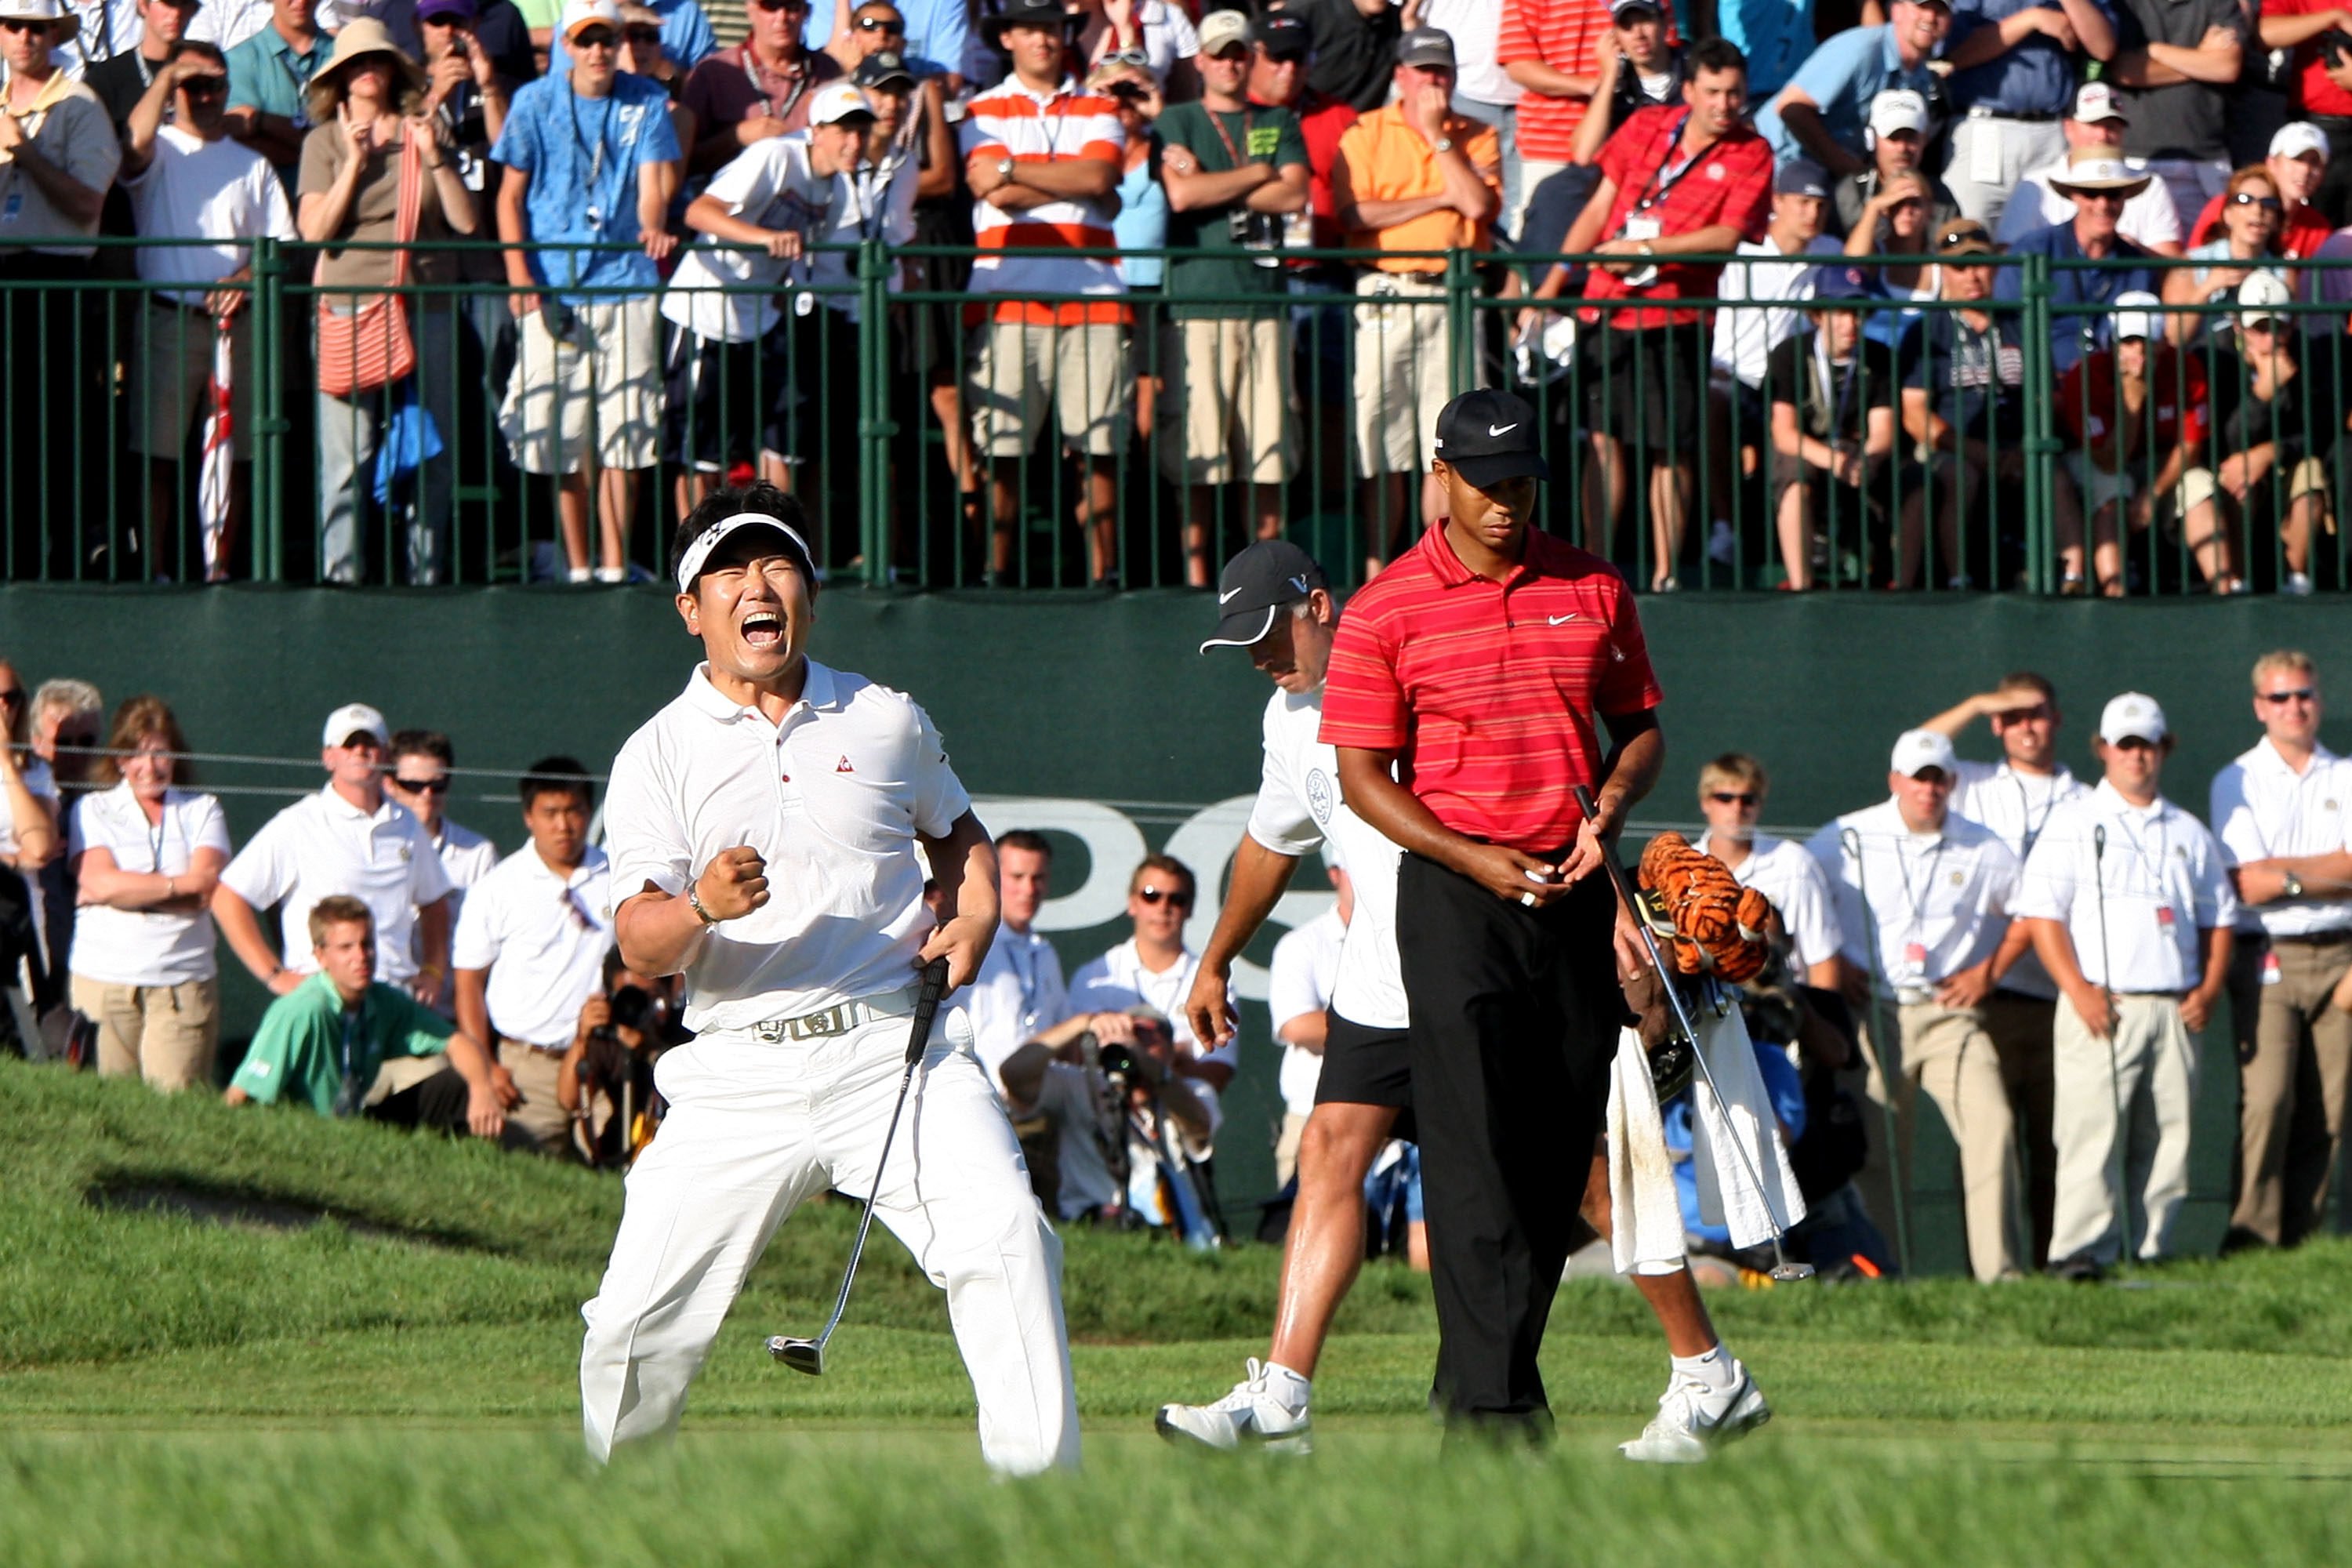 Y.E. Yang celebrates a birdie putt on the 18th green alongside Tiger Woods during the final round of the 91st PGA Championship at Hazeltine National Golf Club on August 16, 2009. Photo: Getty Images